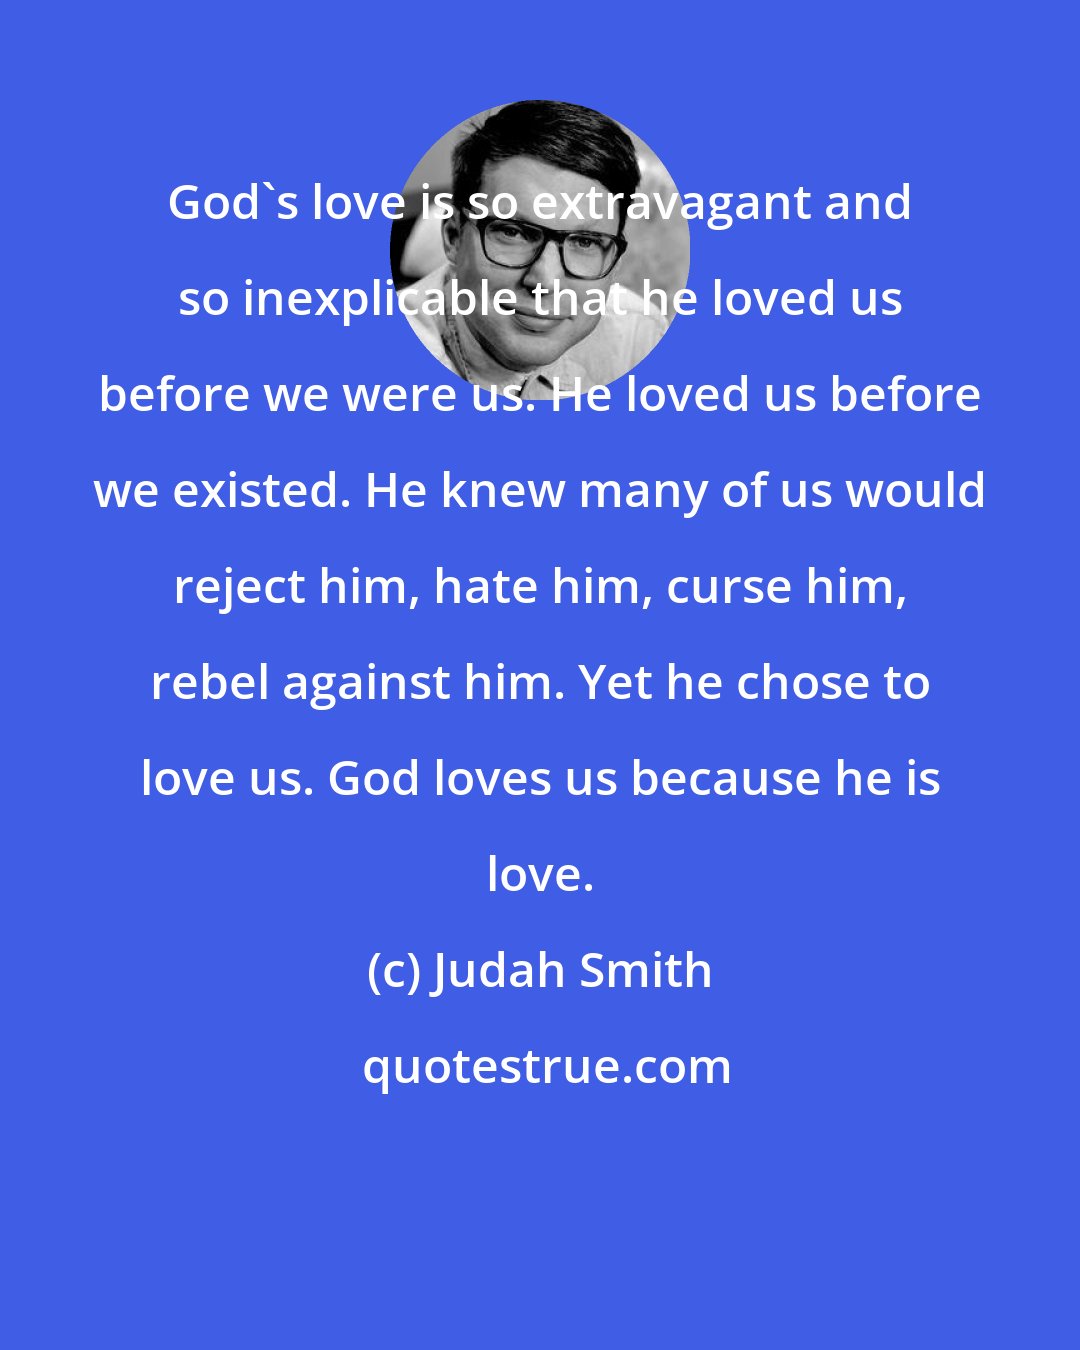 Judah Smith: God's love is so extravagant and so inexplicable that he loved us before we were us. He loved us before we existed. He knew many of us would reject him, hate him, curse him, rebel against him. Yet he chose to love us. God loves us because he is love.